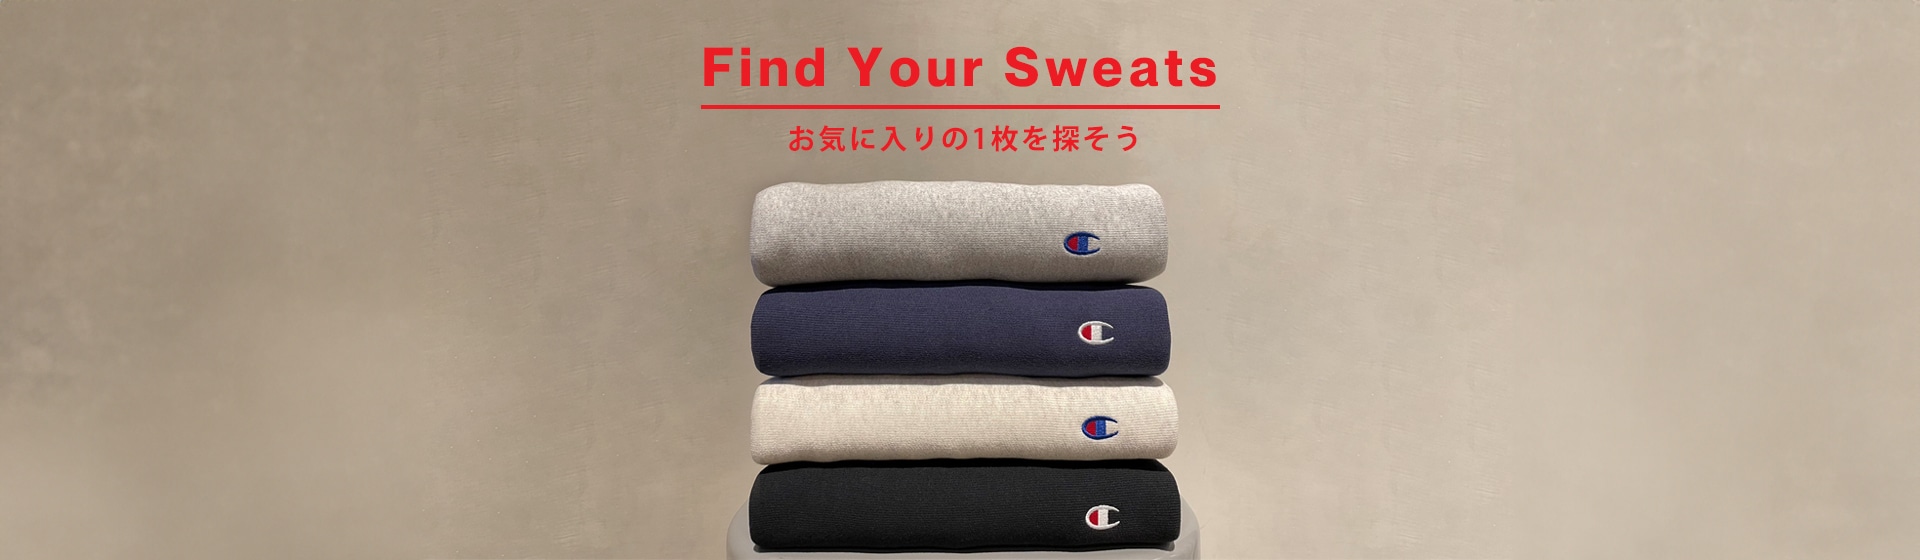 Find Your Sweats